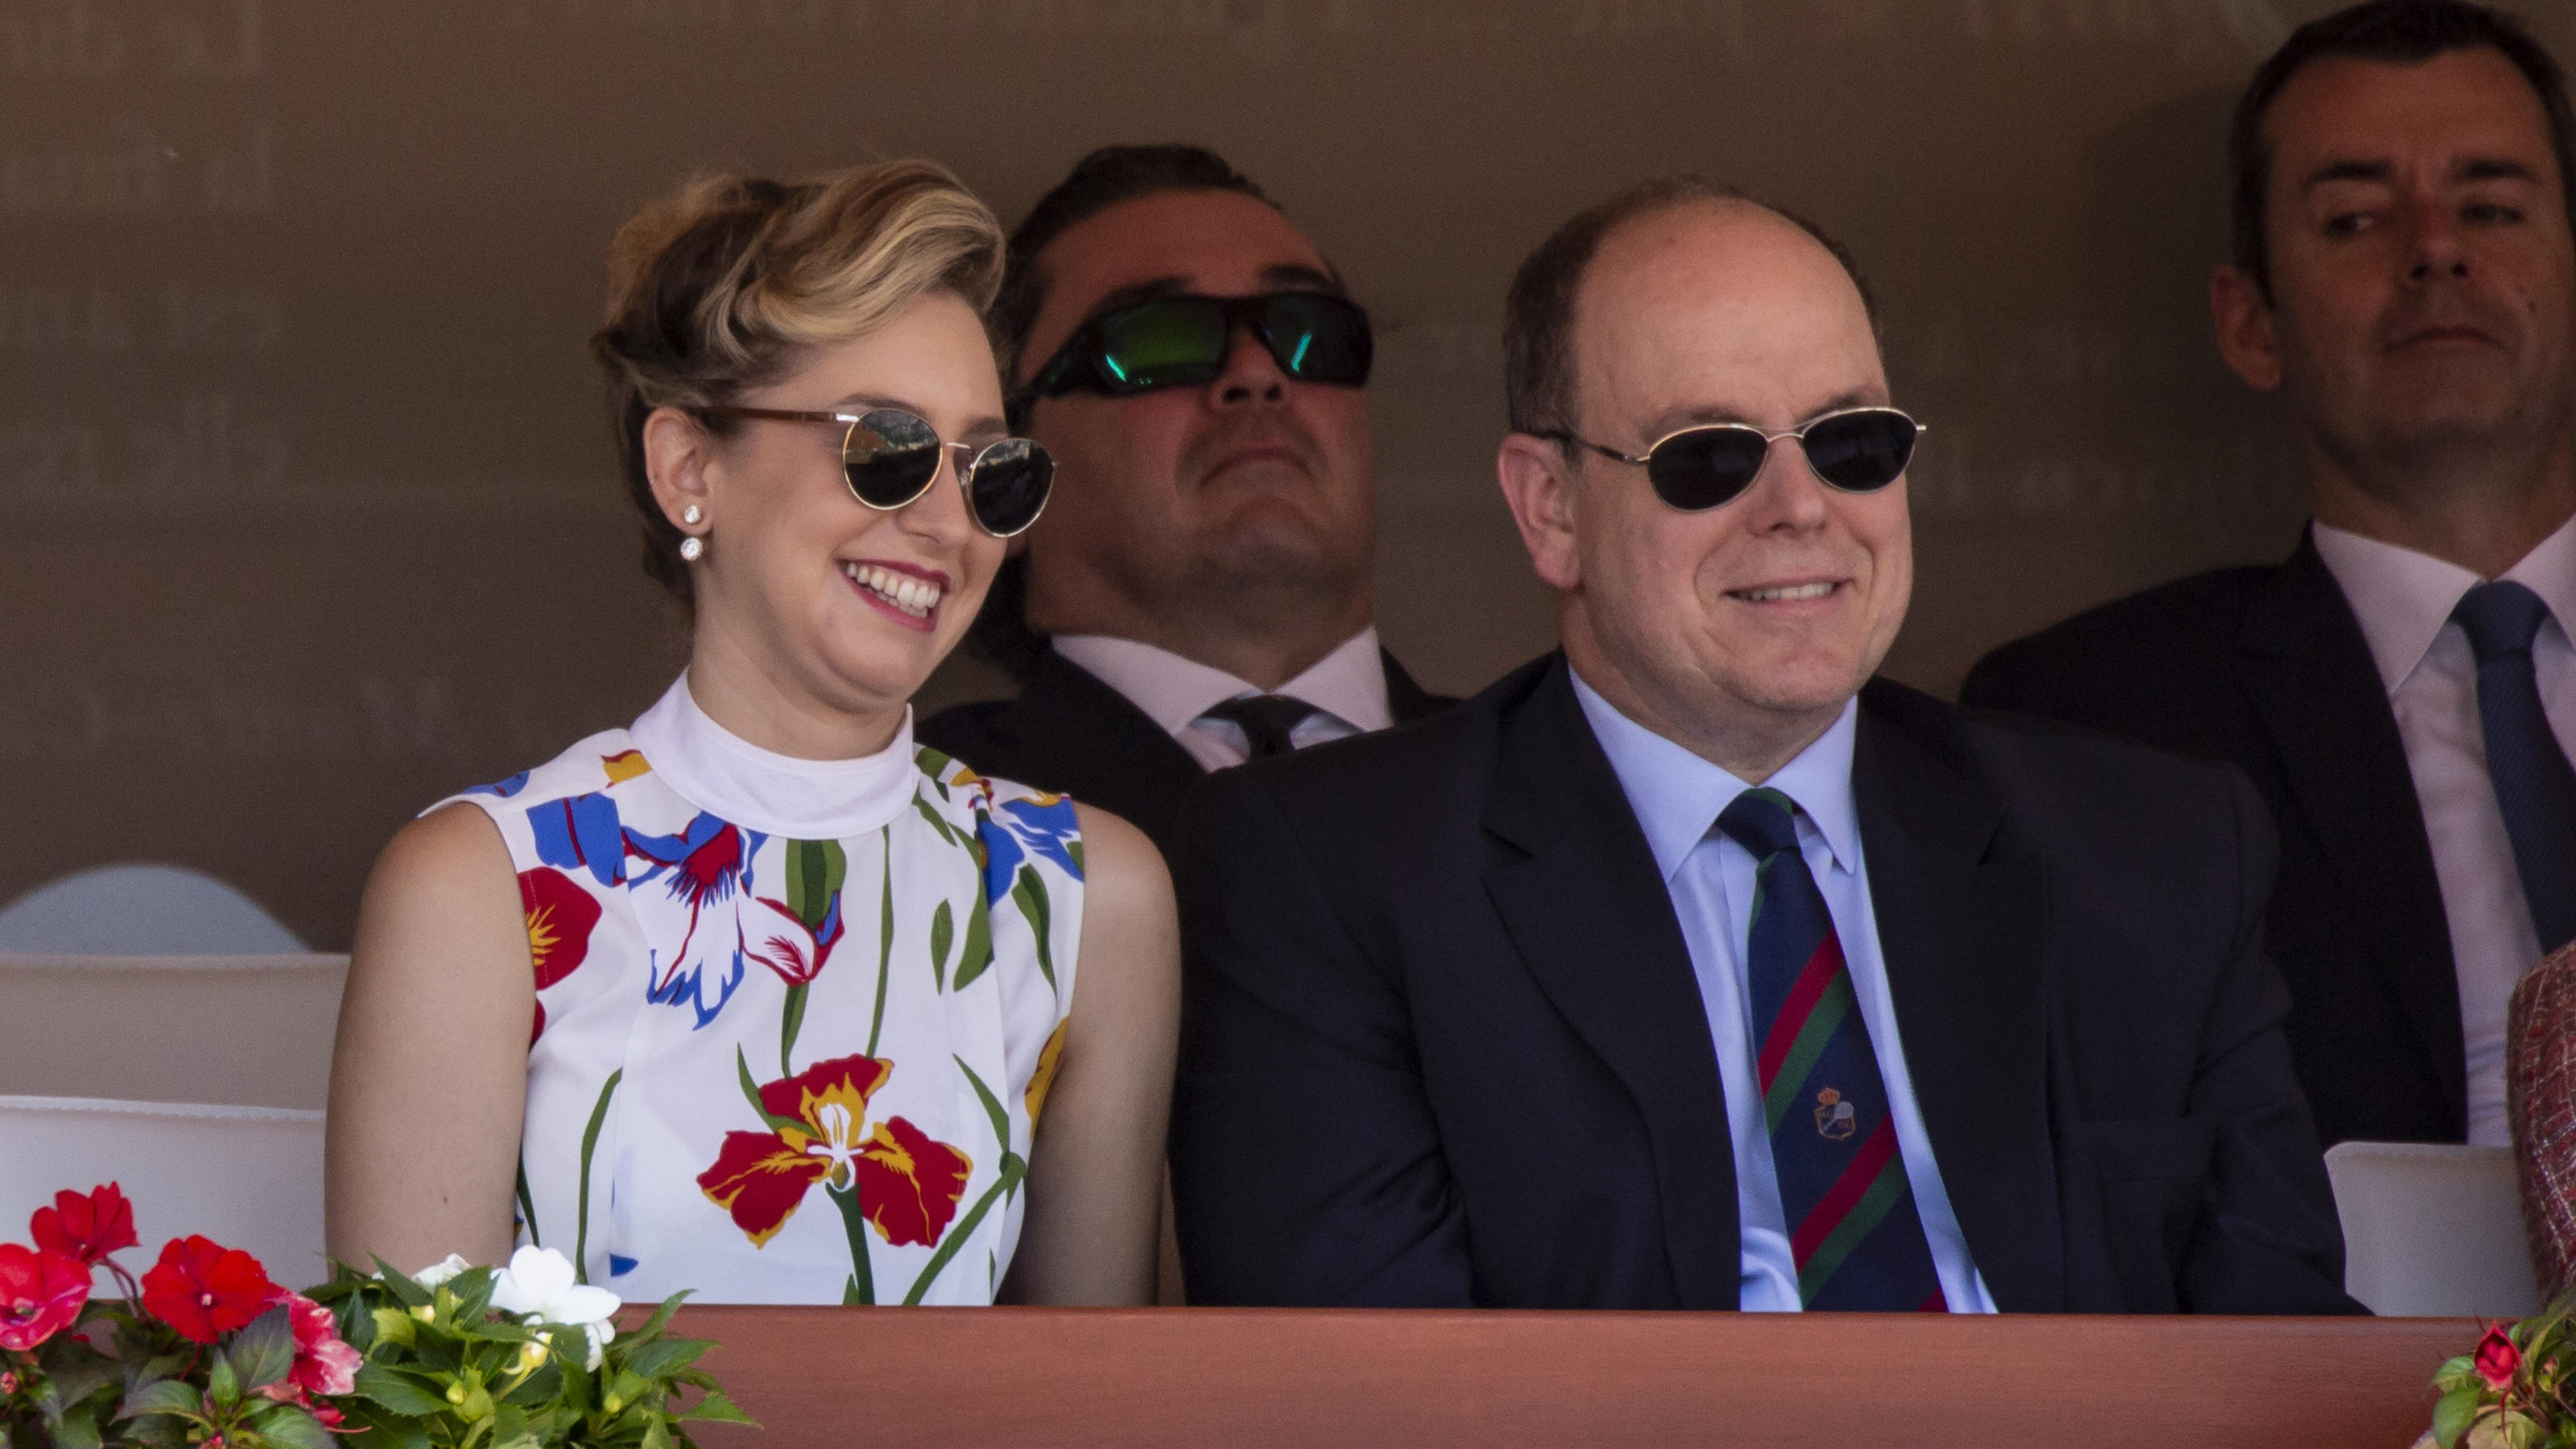 Mellencamp Ian, Grimaldi Jazmin Grace and HSH the Prince Albert II of Monaco attend the match Novak Djocovic vs Dominic Thiem (7-6, 2-6, 3-6) during the Monte Carlo Rolex Masters at the Country Club of Monaco. Monaco on april 19th, 2018. Photo by ABA